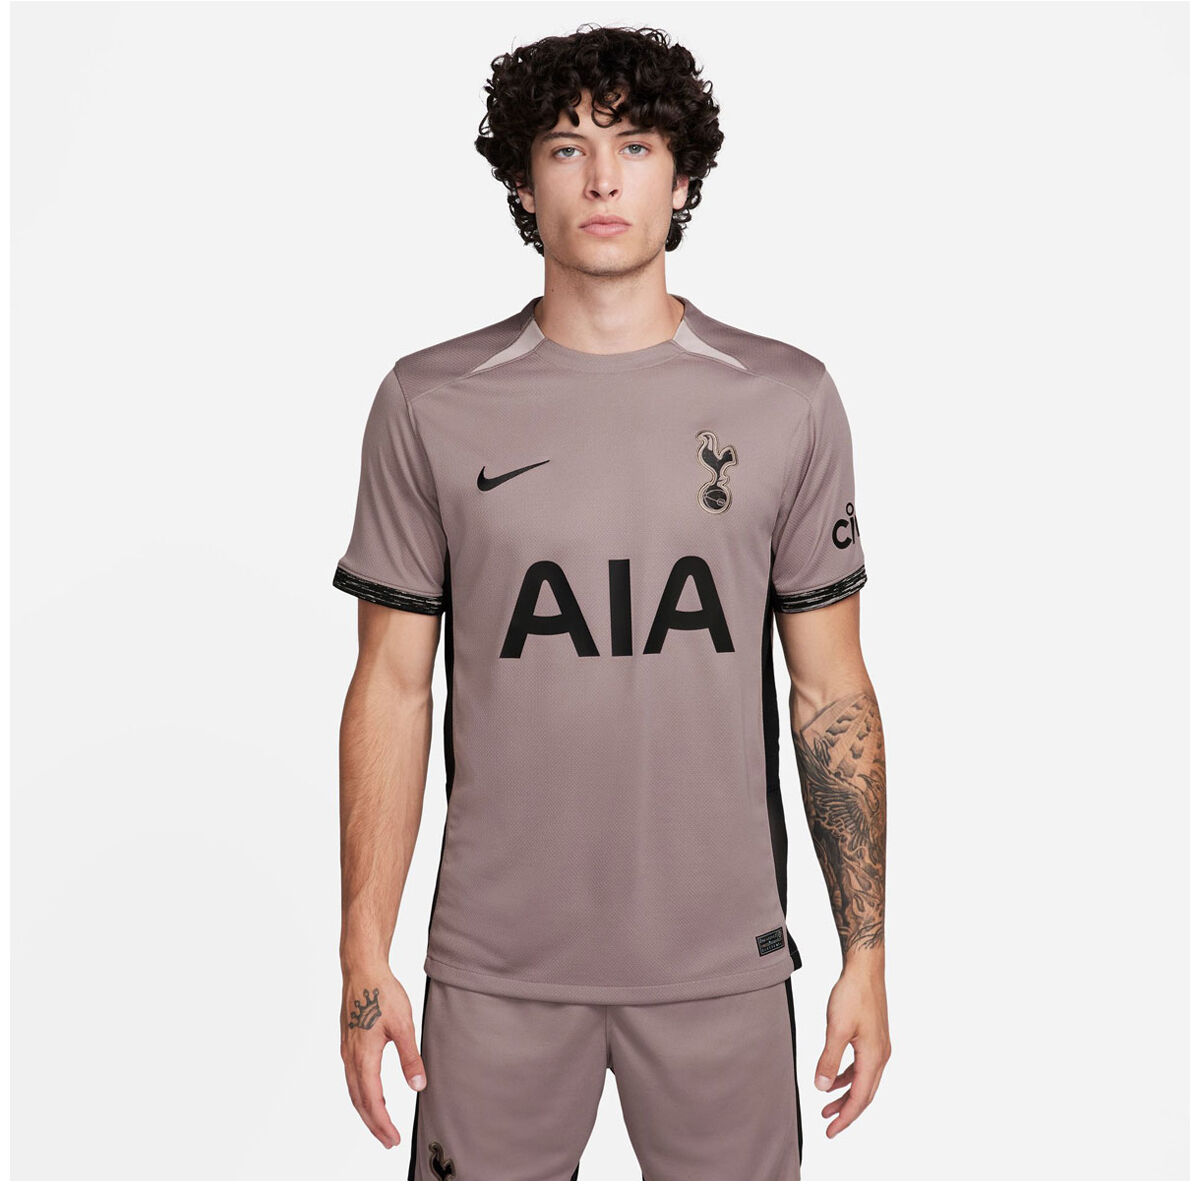 Tottenham fans go wild for 'best in the league' third kit which